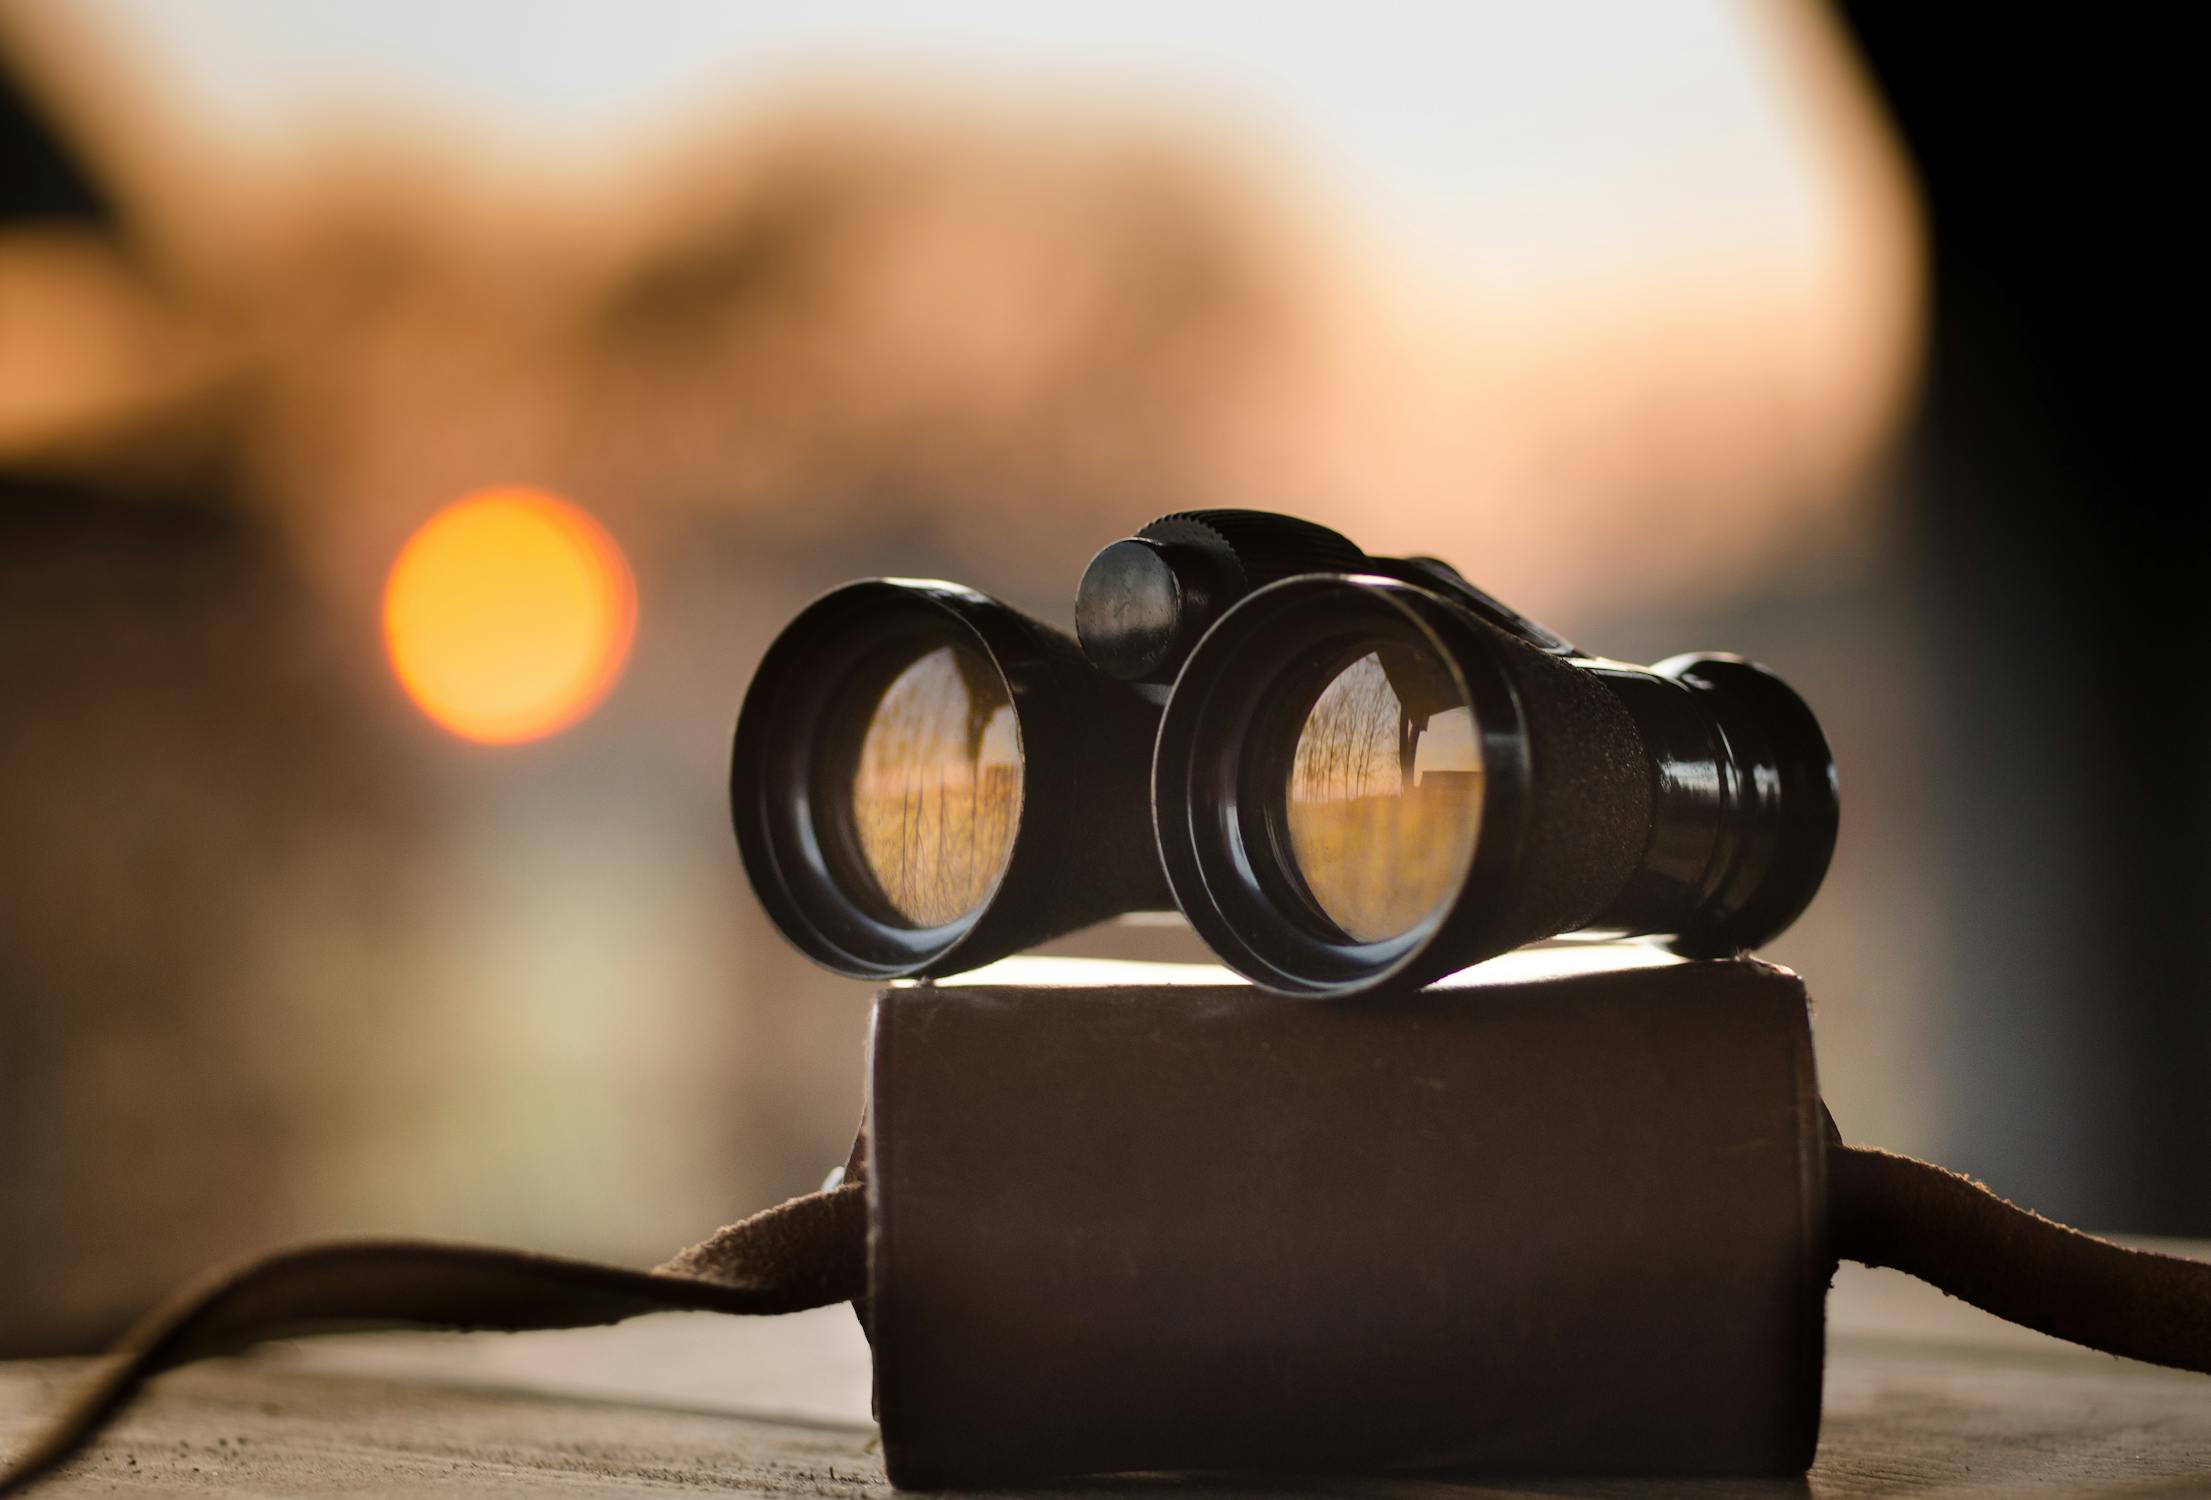 Black Binocular on Round Device by PHOTOGRAPHER

Skitterphoto available on pexels https://www.pexels.com/photo/black-binocular-on-round-device-63901/

